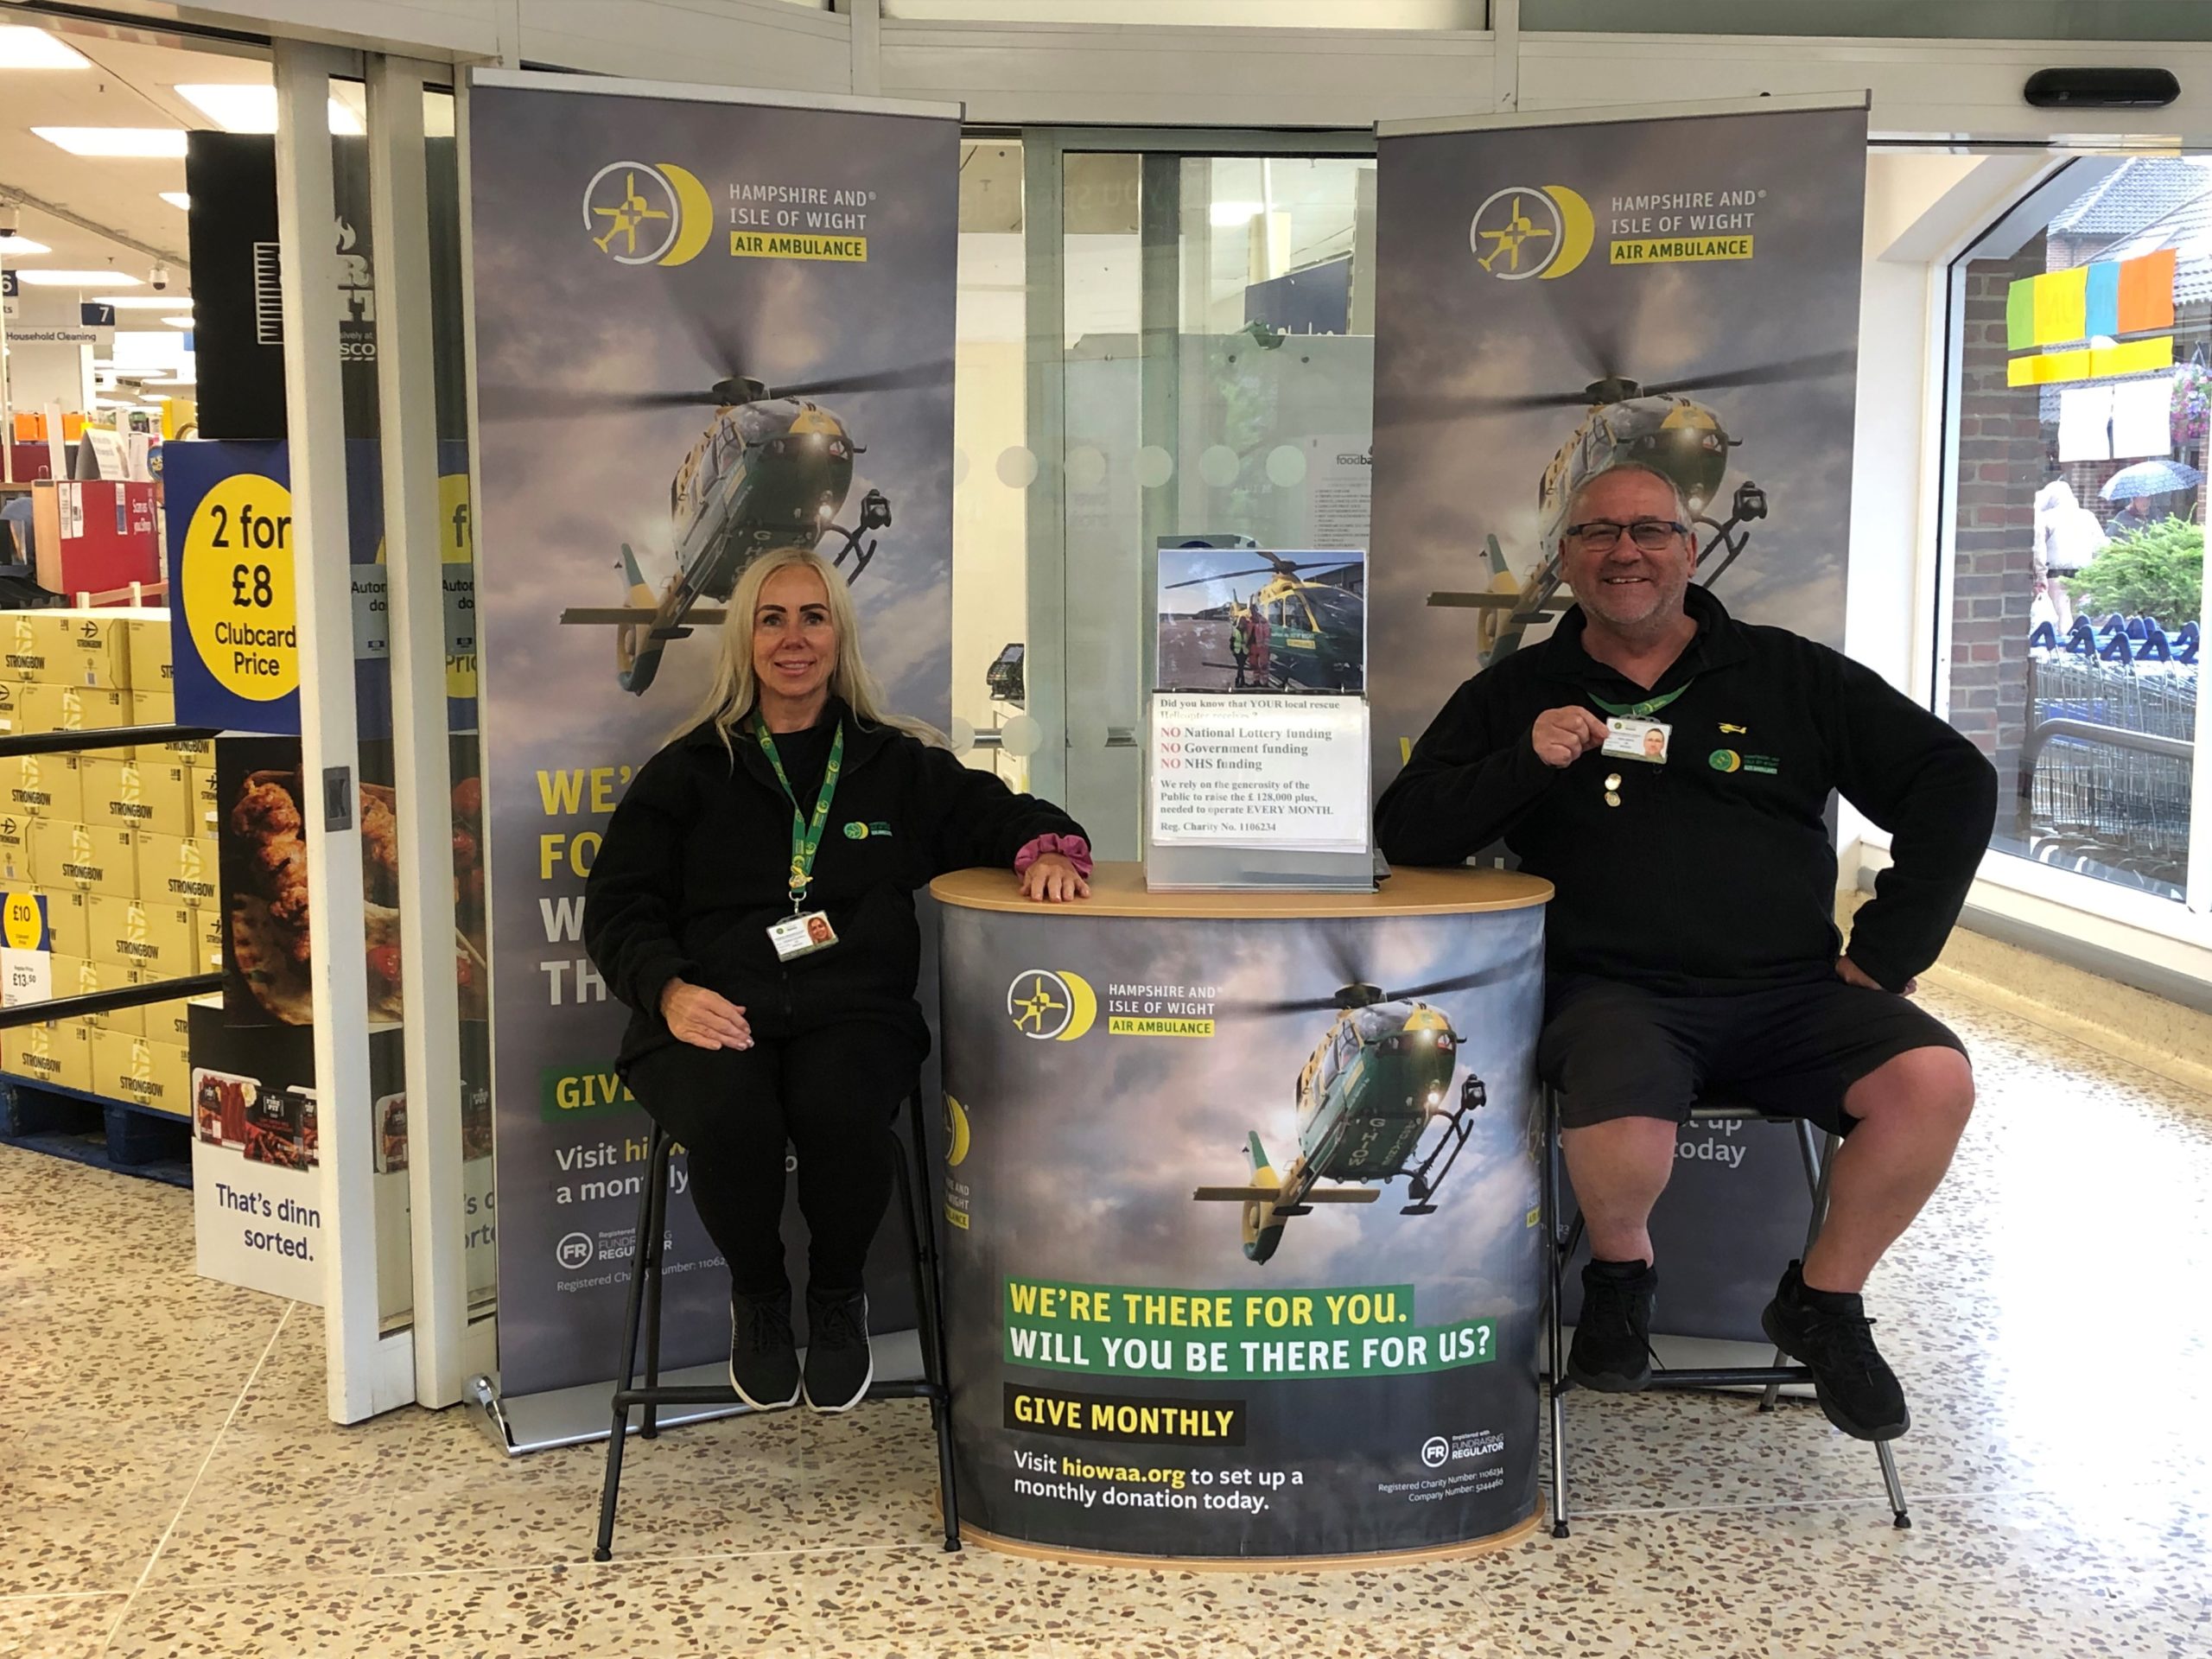 Mark and Theresa are sat in the foyer of a supermarket. They are surrounded by Hampshire and Isle of Wight Air Ambulance banners, and are leaning on a regular giving podium.